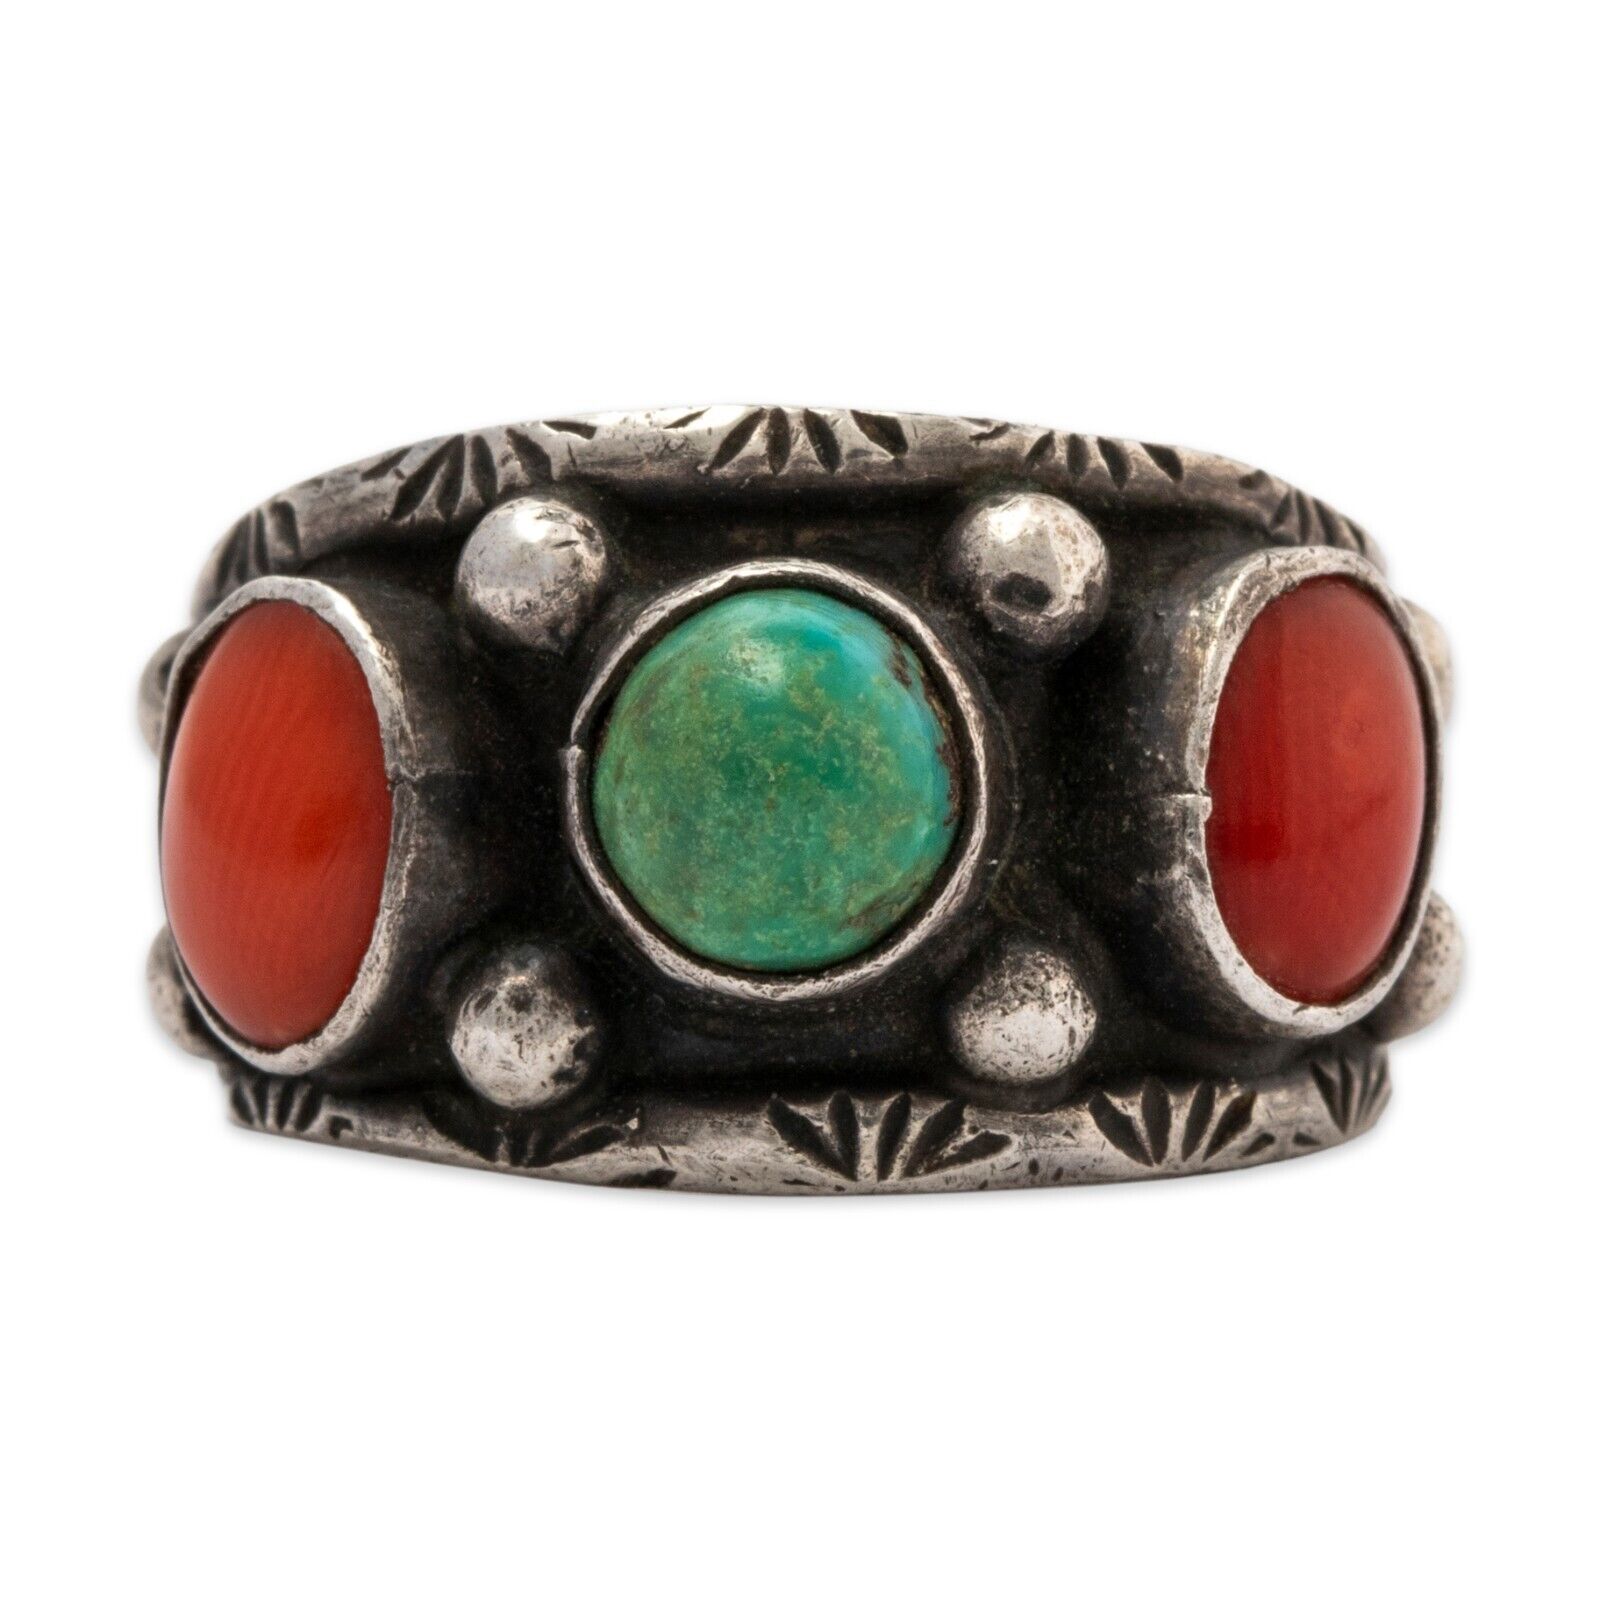 NATIVE AMERICAN STERLING SILVER GREEN TURQUOISE CORAL STAMP WORK RING 5.25